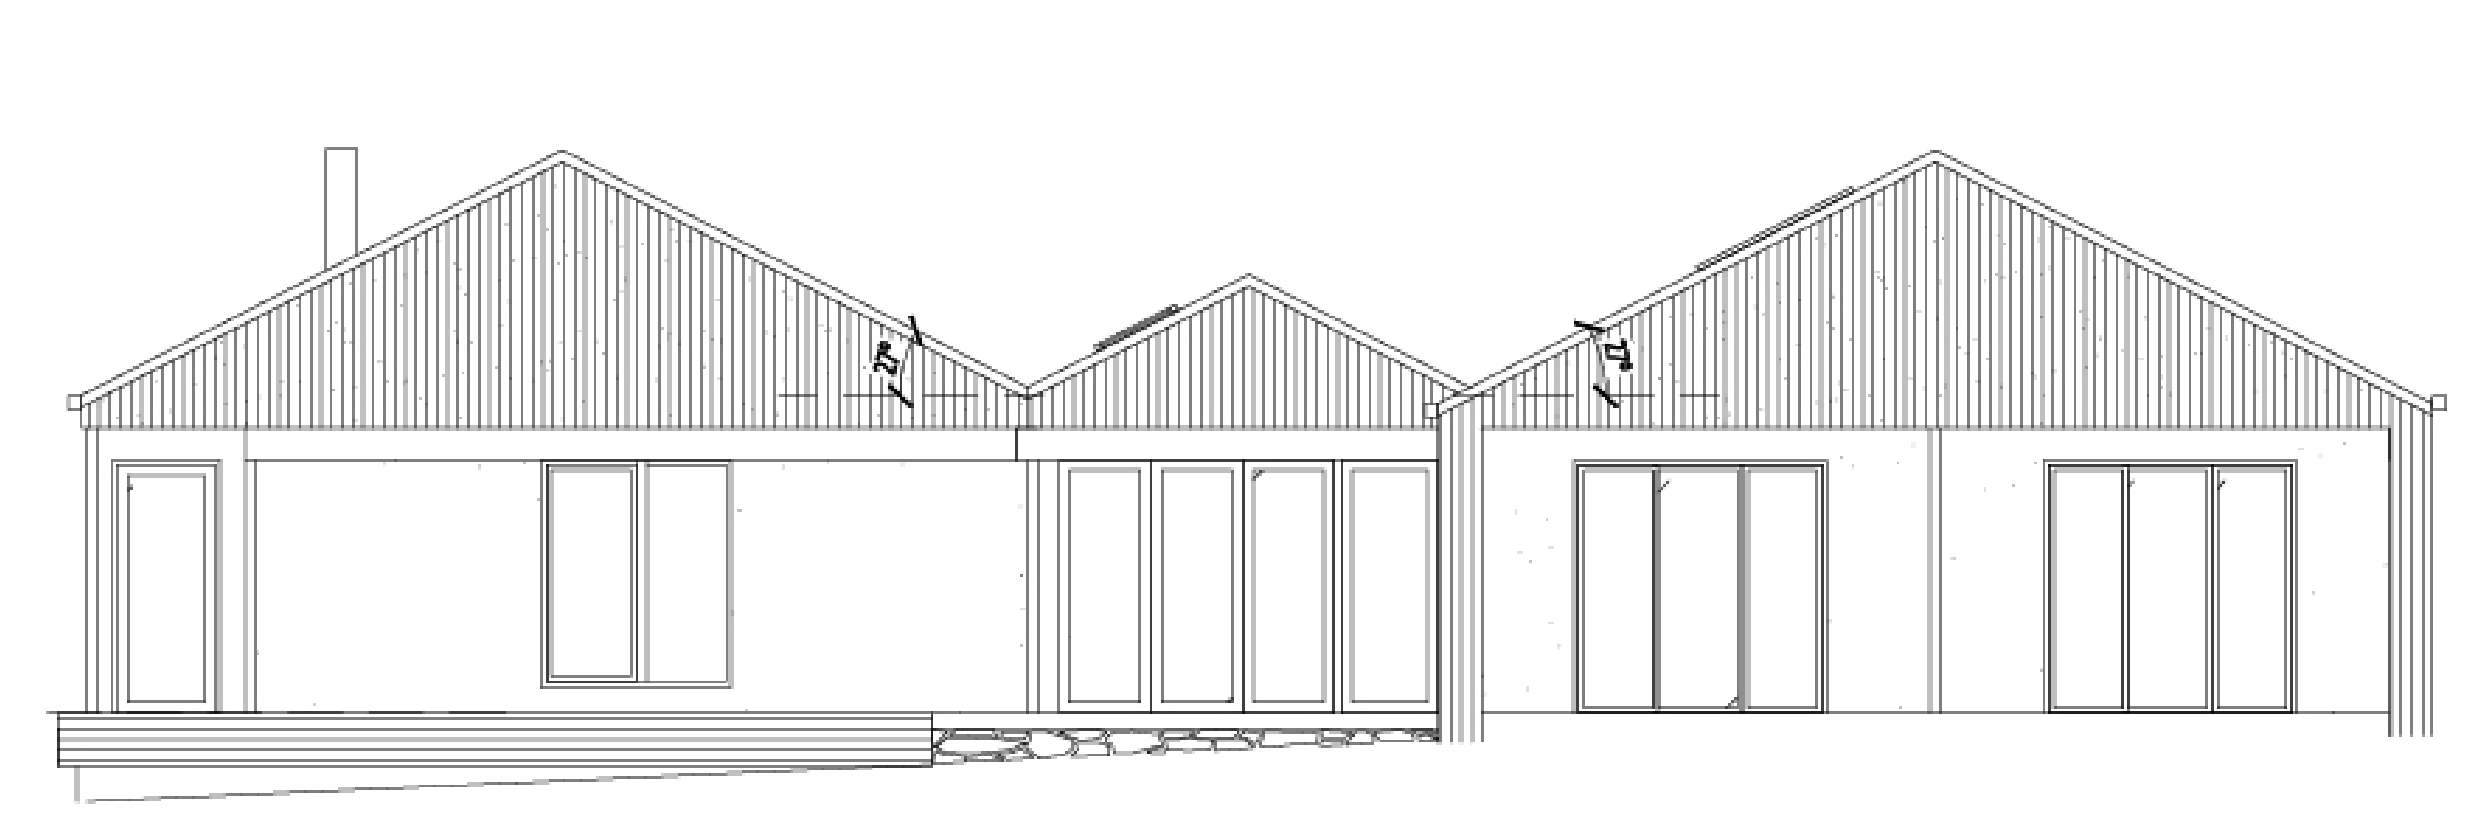 Nott custom shed house drawing